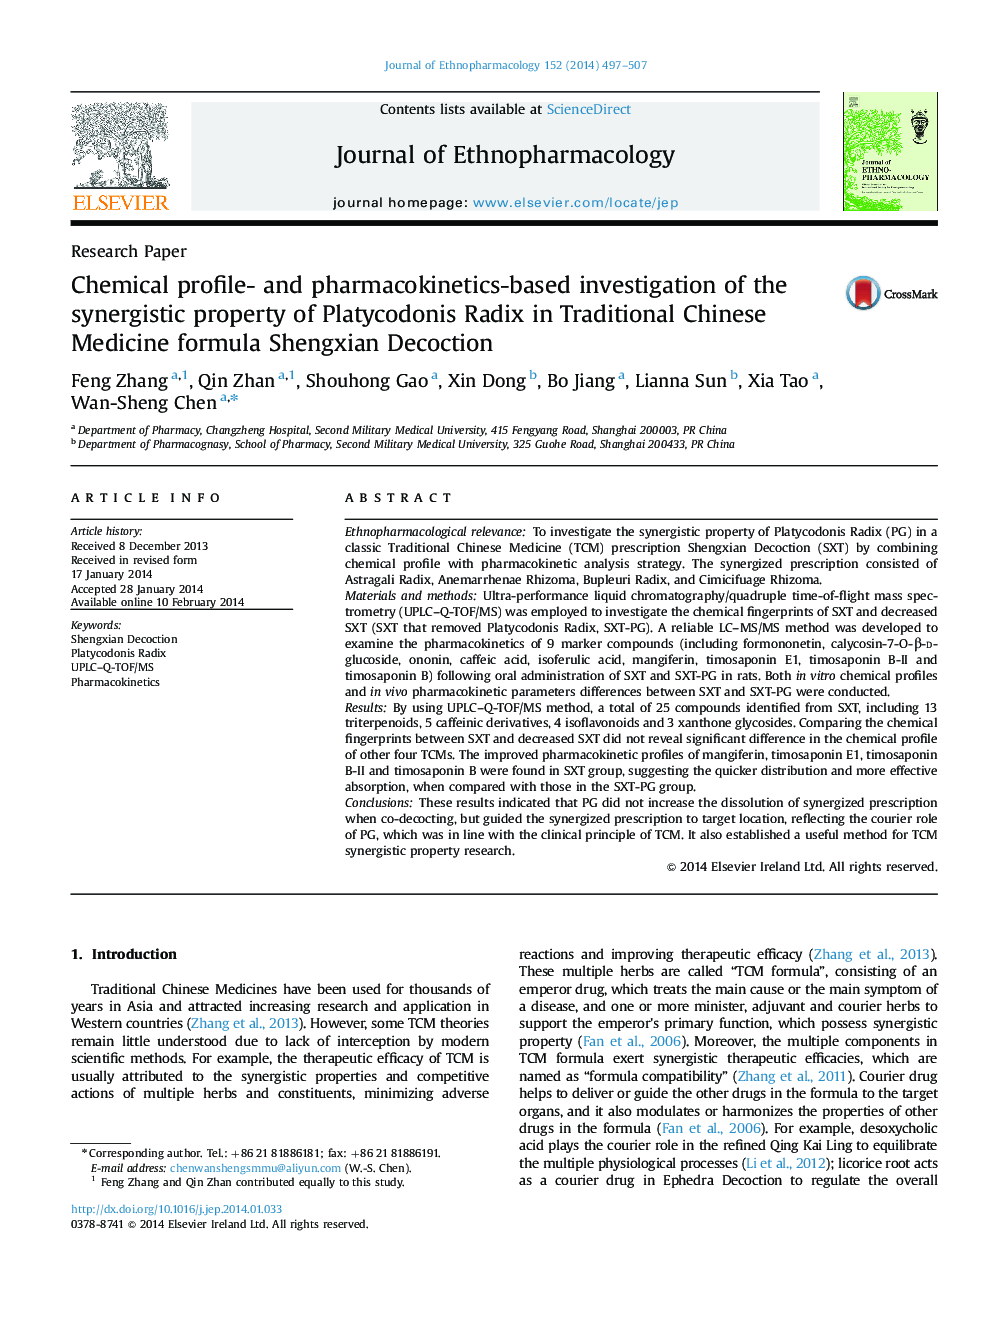 Chemical profile- and pharmacokinetics-based investigation of the synergistic property of Platycodonis Radix in Traditional Chinese Medicine formula Shengxian Decoction